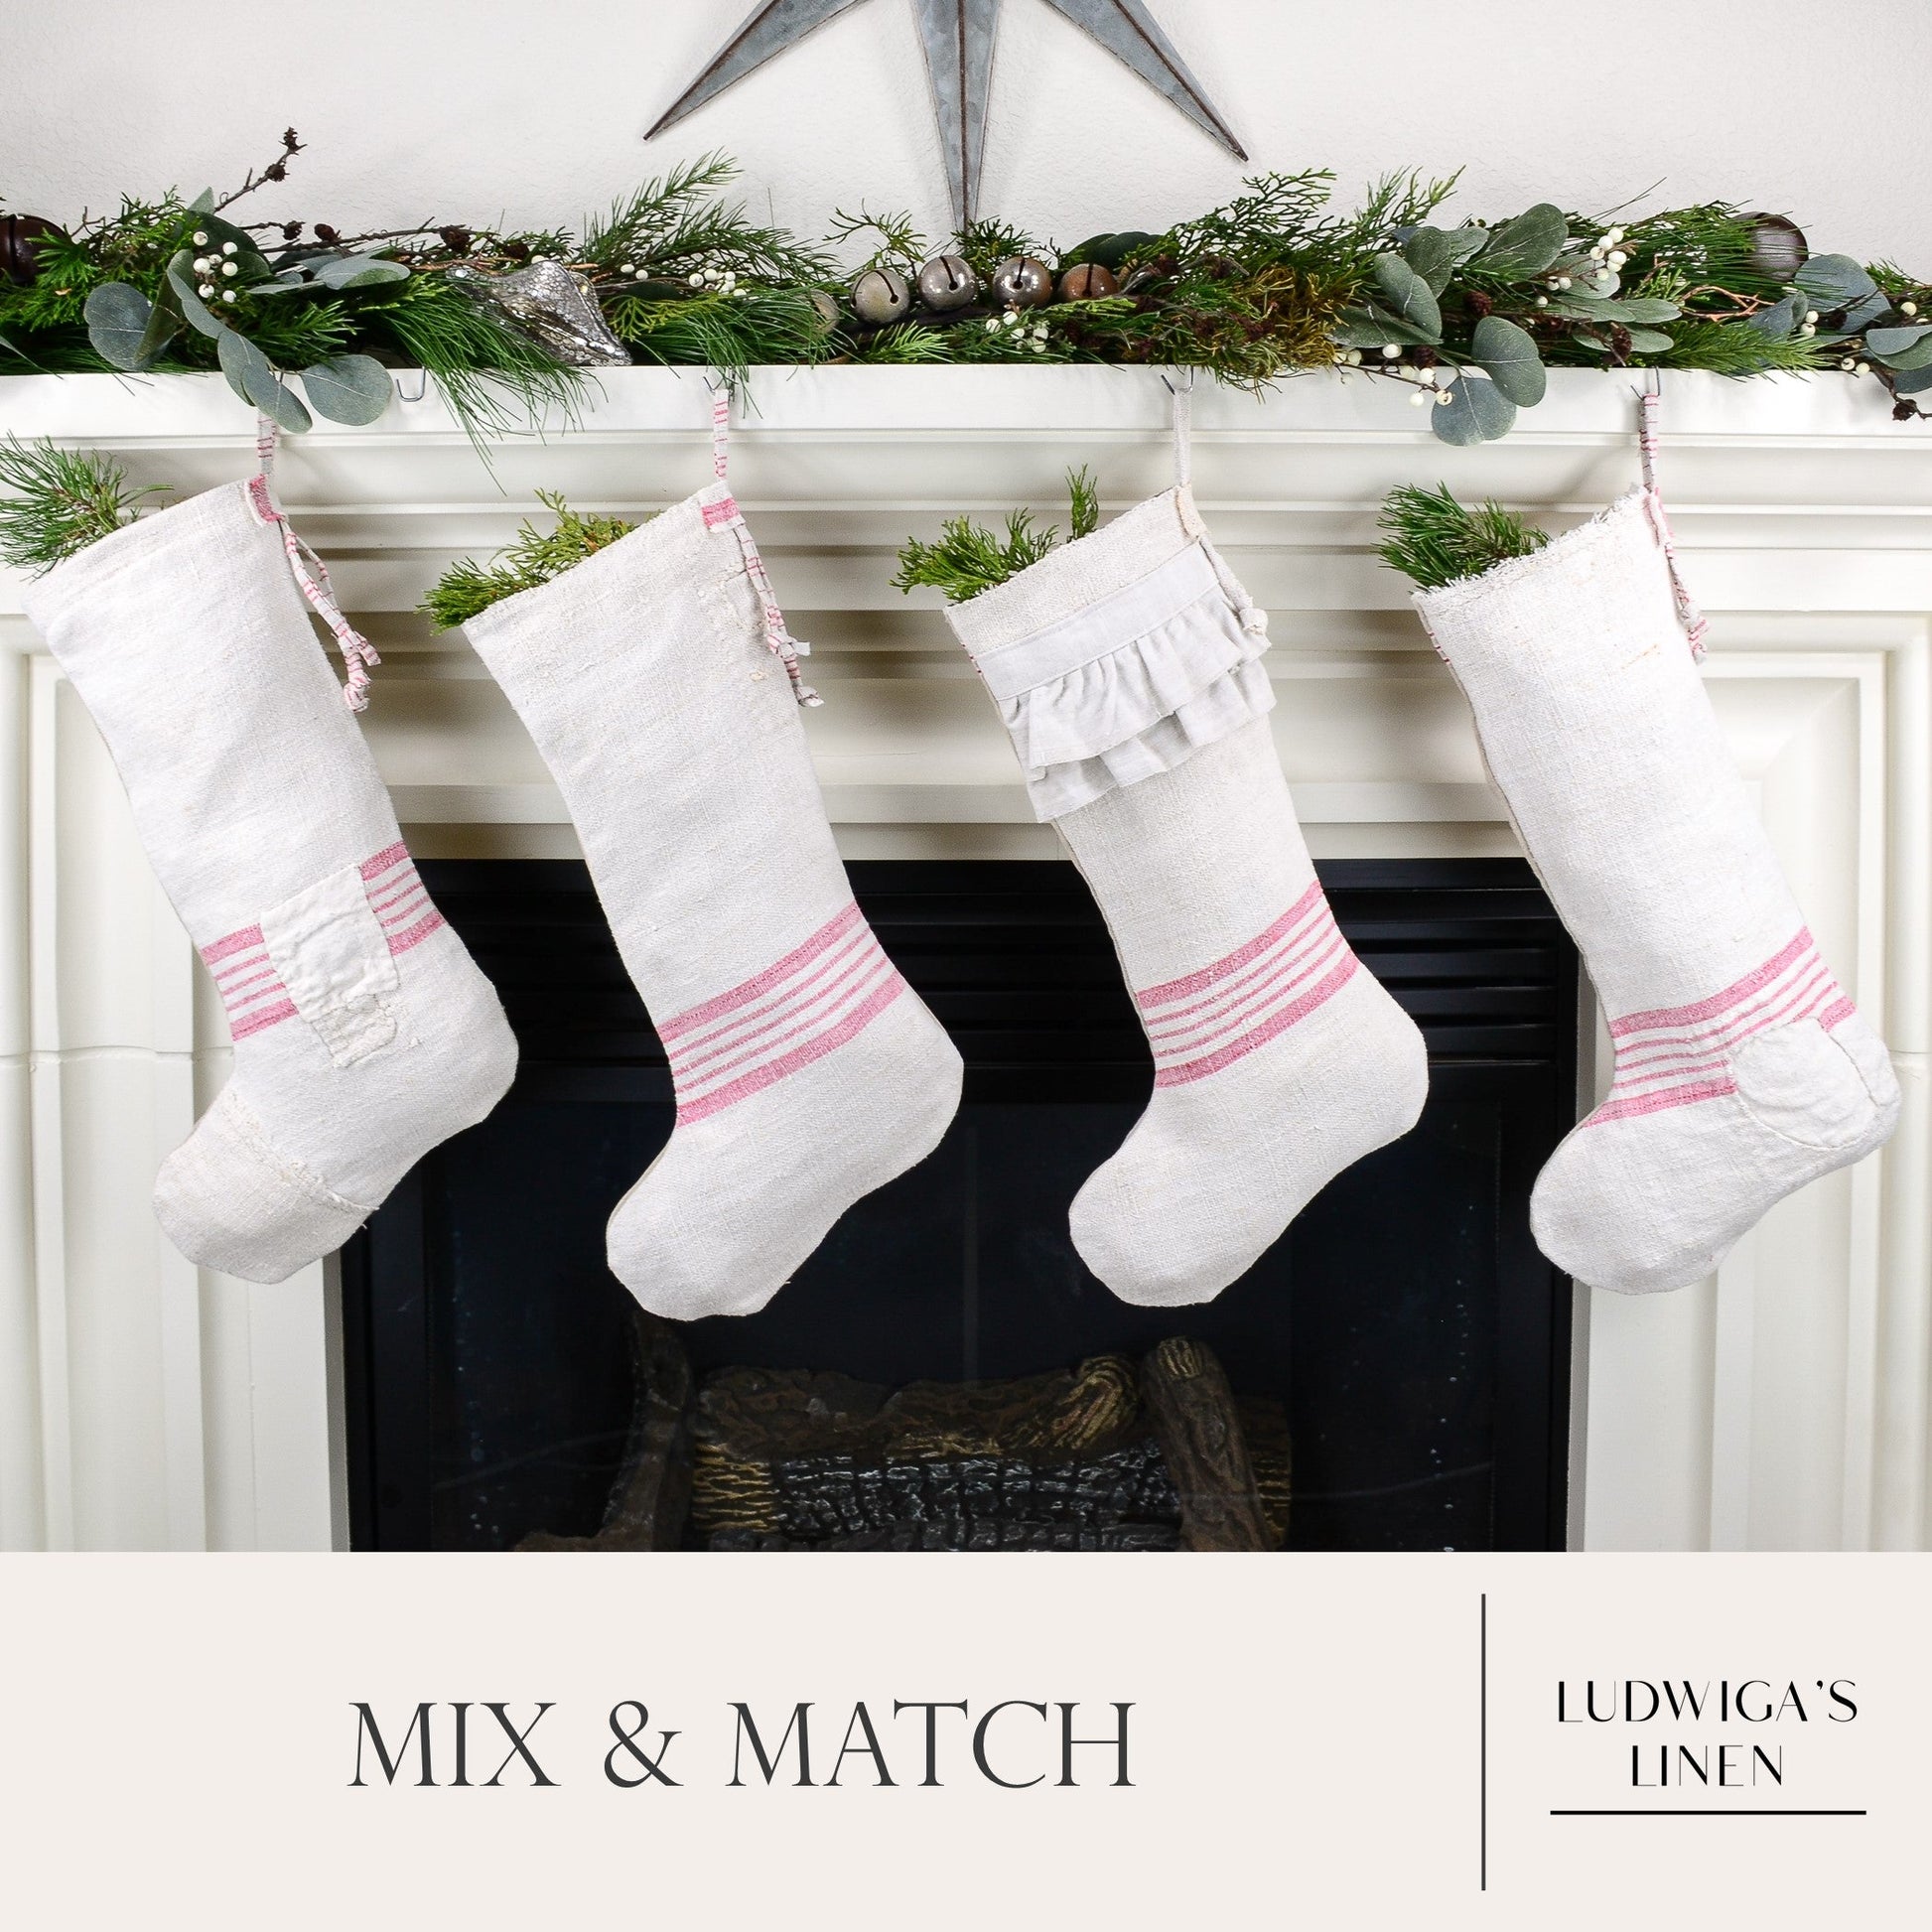 Group of four Christmas stockings hanging on fireplace